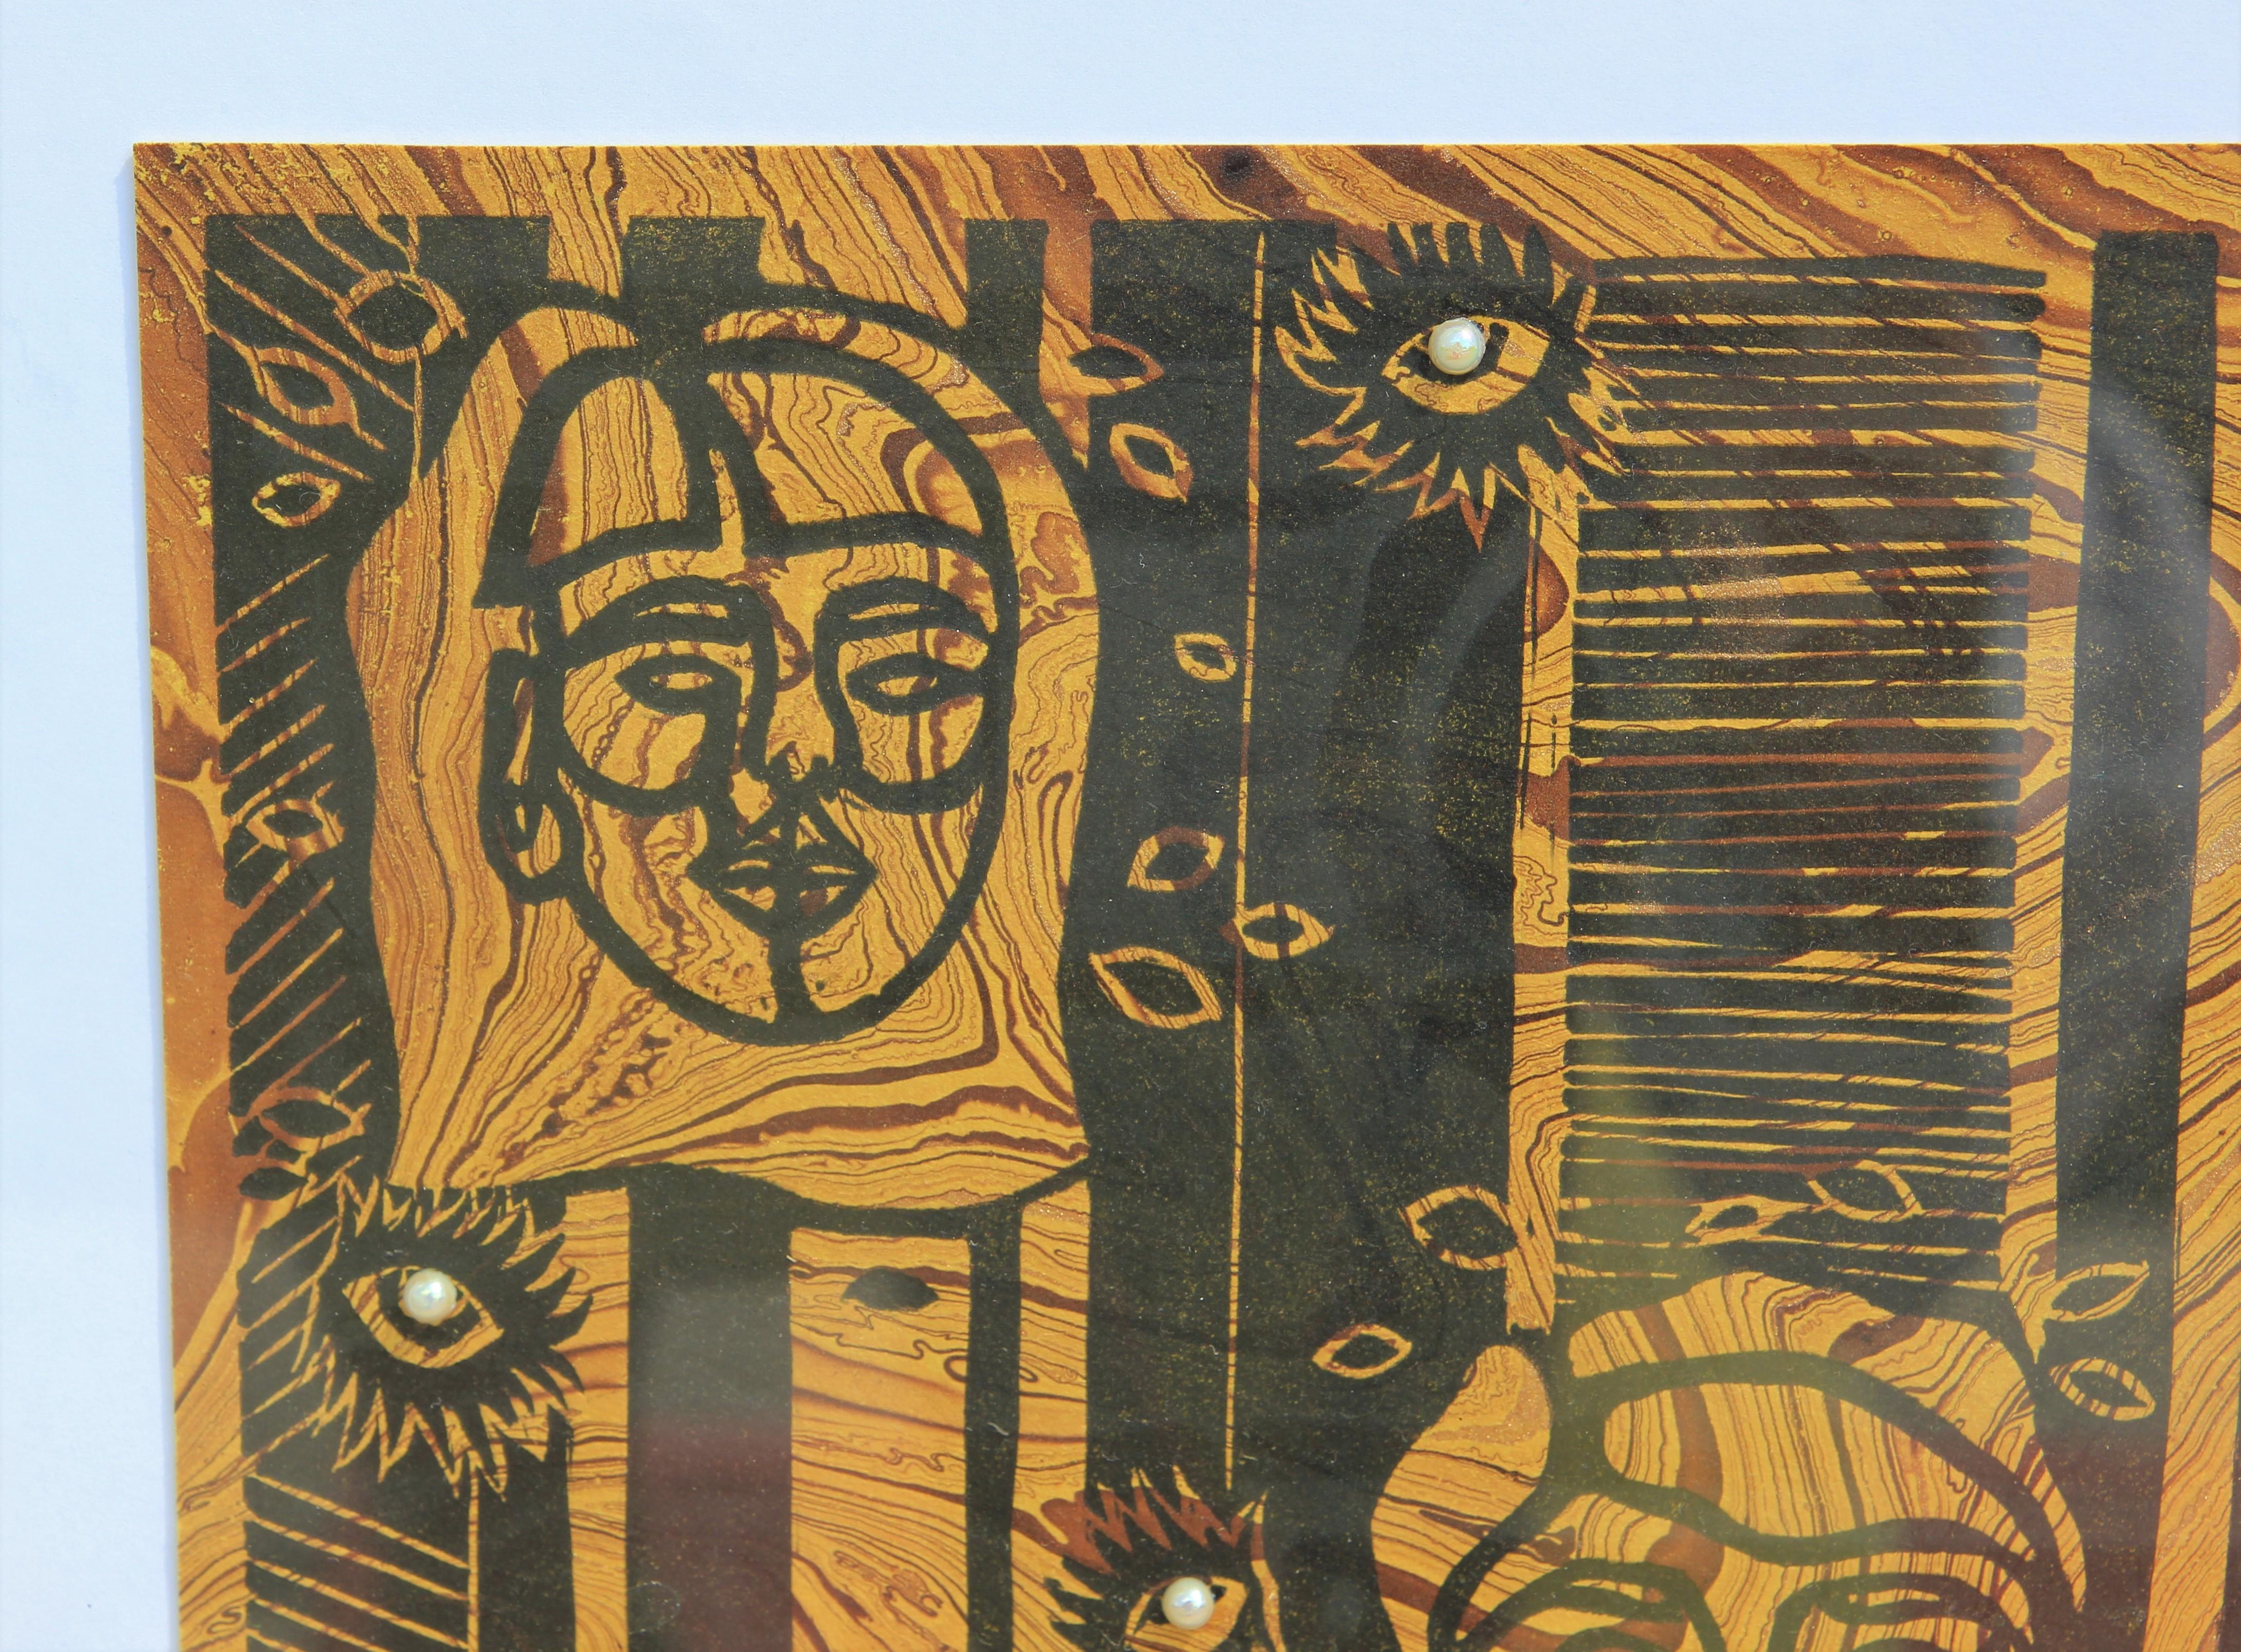 Courtney Khim block print on marbled paper that incorporates hues of gold, black and brown. The print consists of two figures surrounded by floating eyes that are adorned with pearlesque rhinestones. The pieces is signed, titled, and dated by the